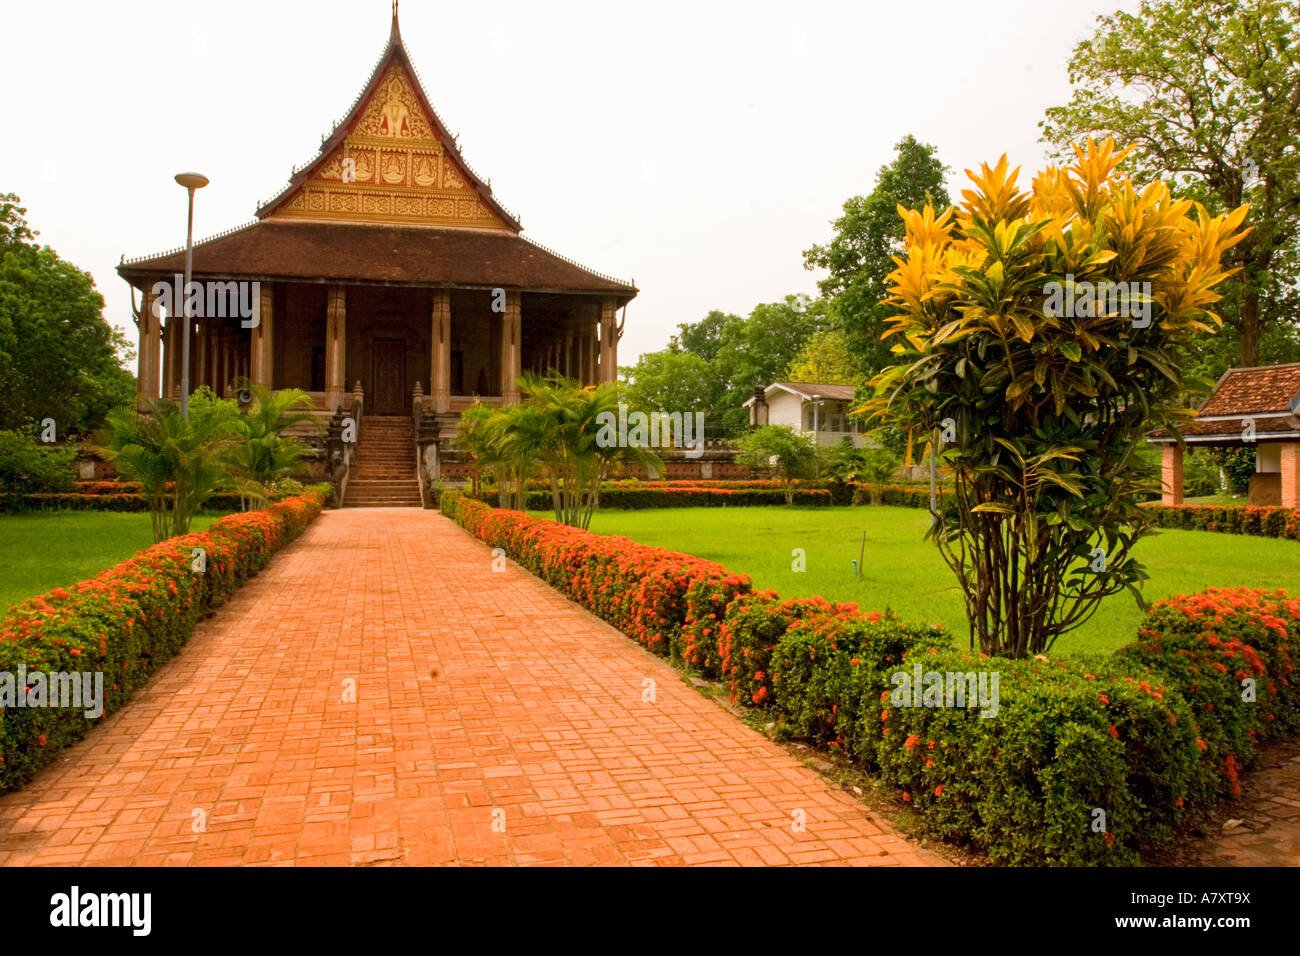 Laos, Vientiane, Haw Pha Kaew formerly the temple of the Lan Xang and Laos Monarchy, Now a museum Stock Photo